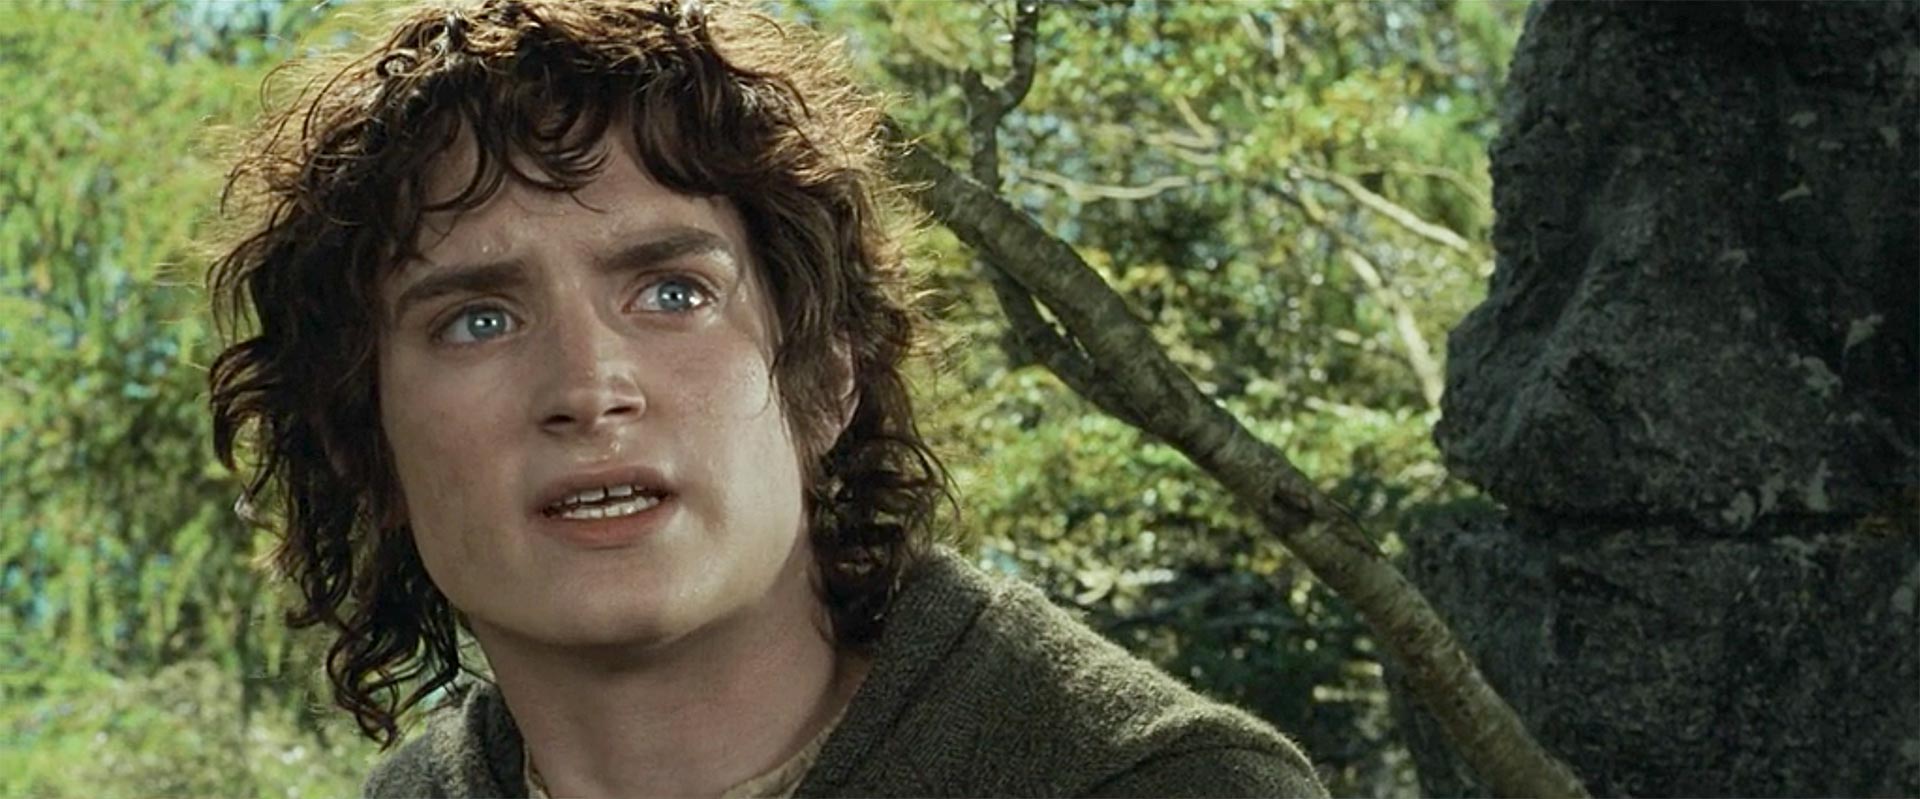 the lord of the rings the fellowship of the ring 4k digital still